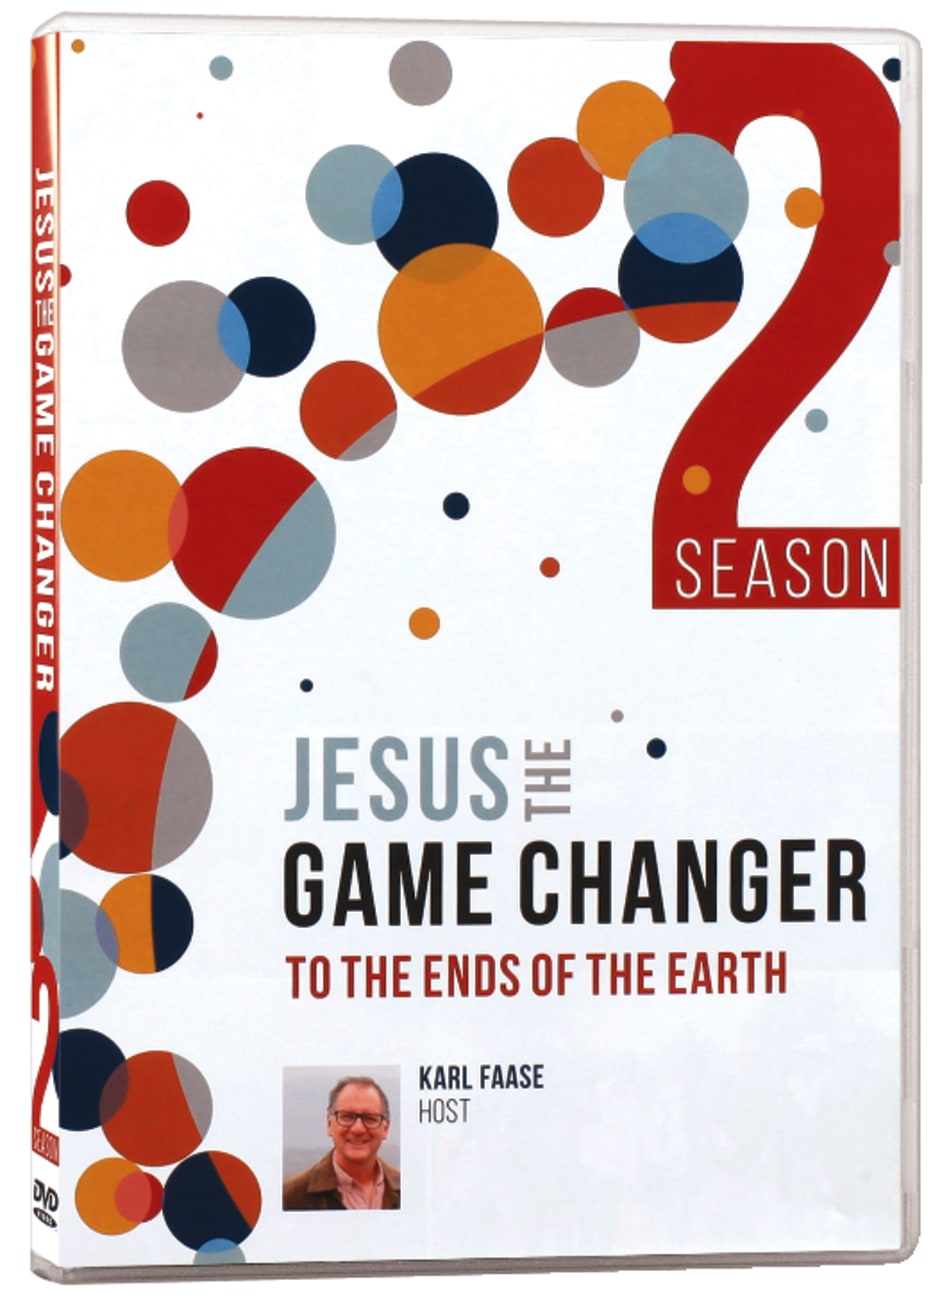 Jesus the Game Changer: To the Ends of the Earth (Season 2, 13 Episode 2 Dvd Set) DVD